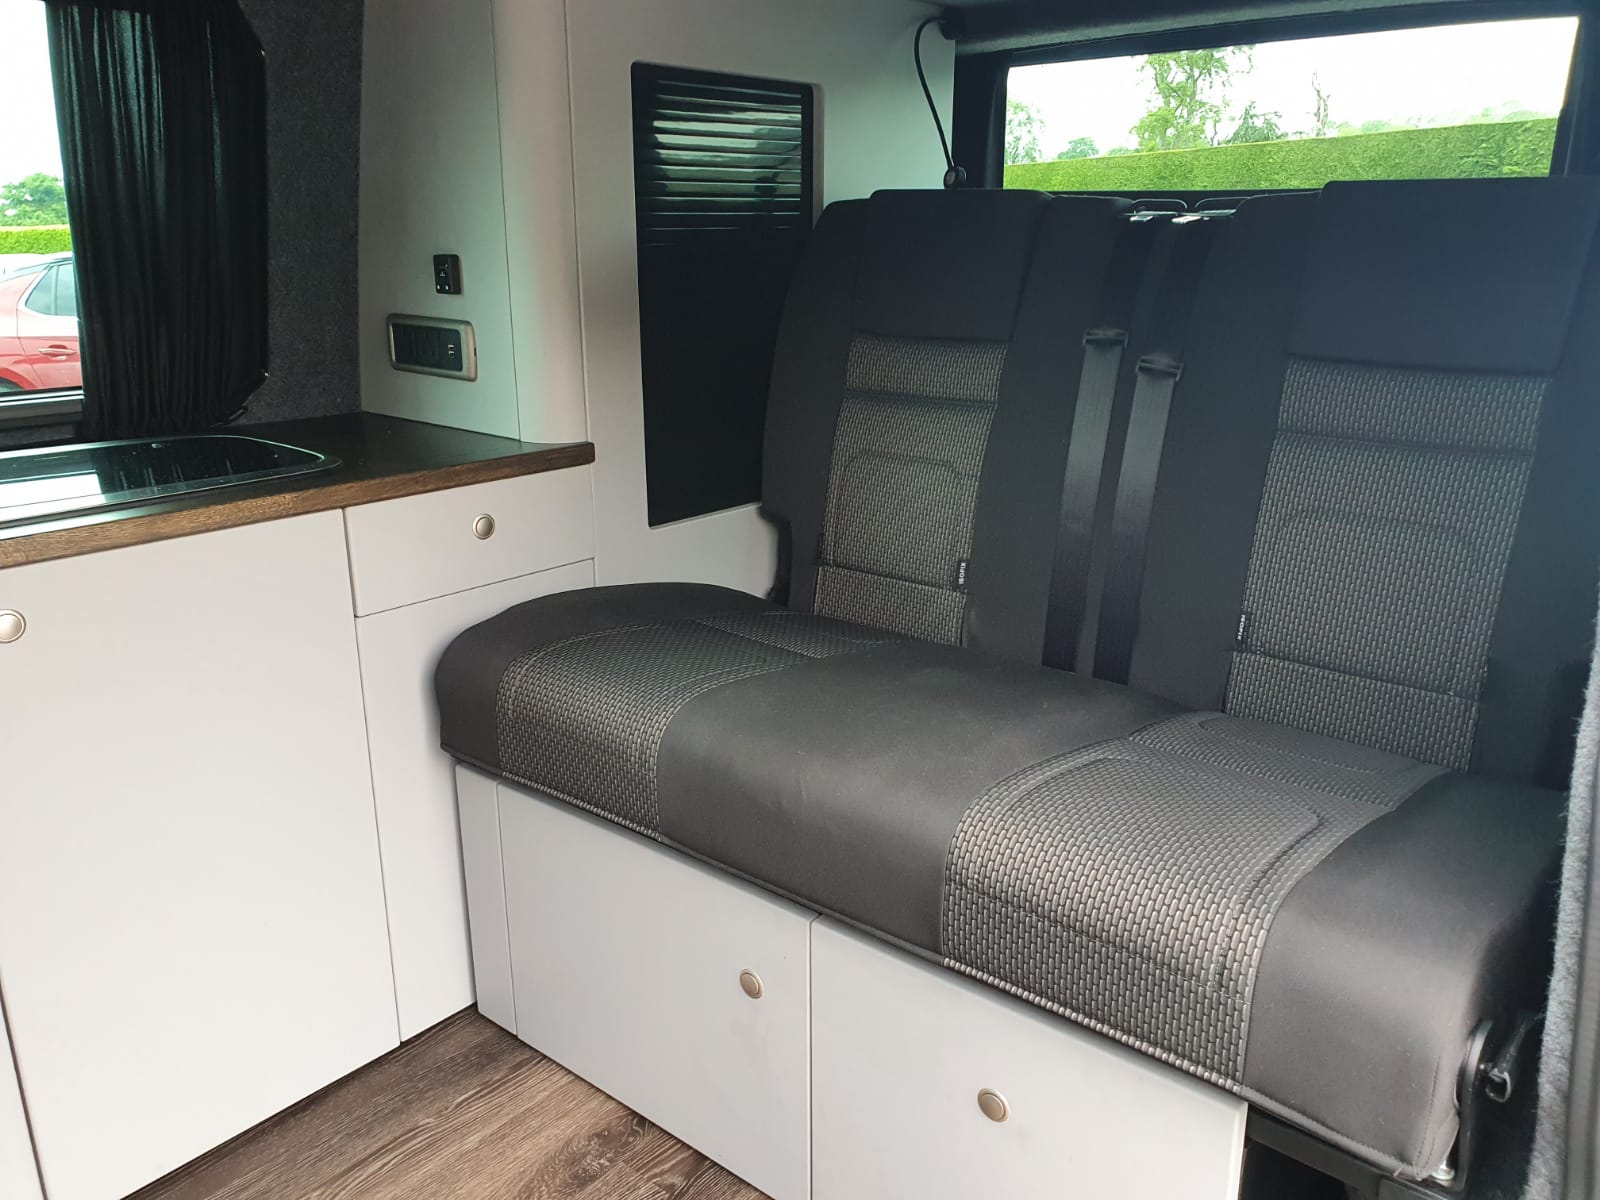 2021 Volkswagen Transporter Diesel Tiptronic Automatic – Colin Francis Cars – Mid Ulster full